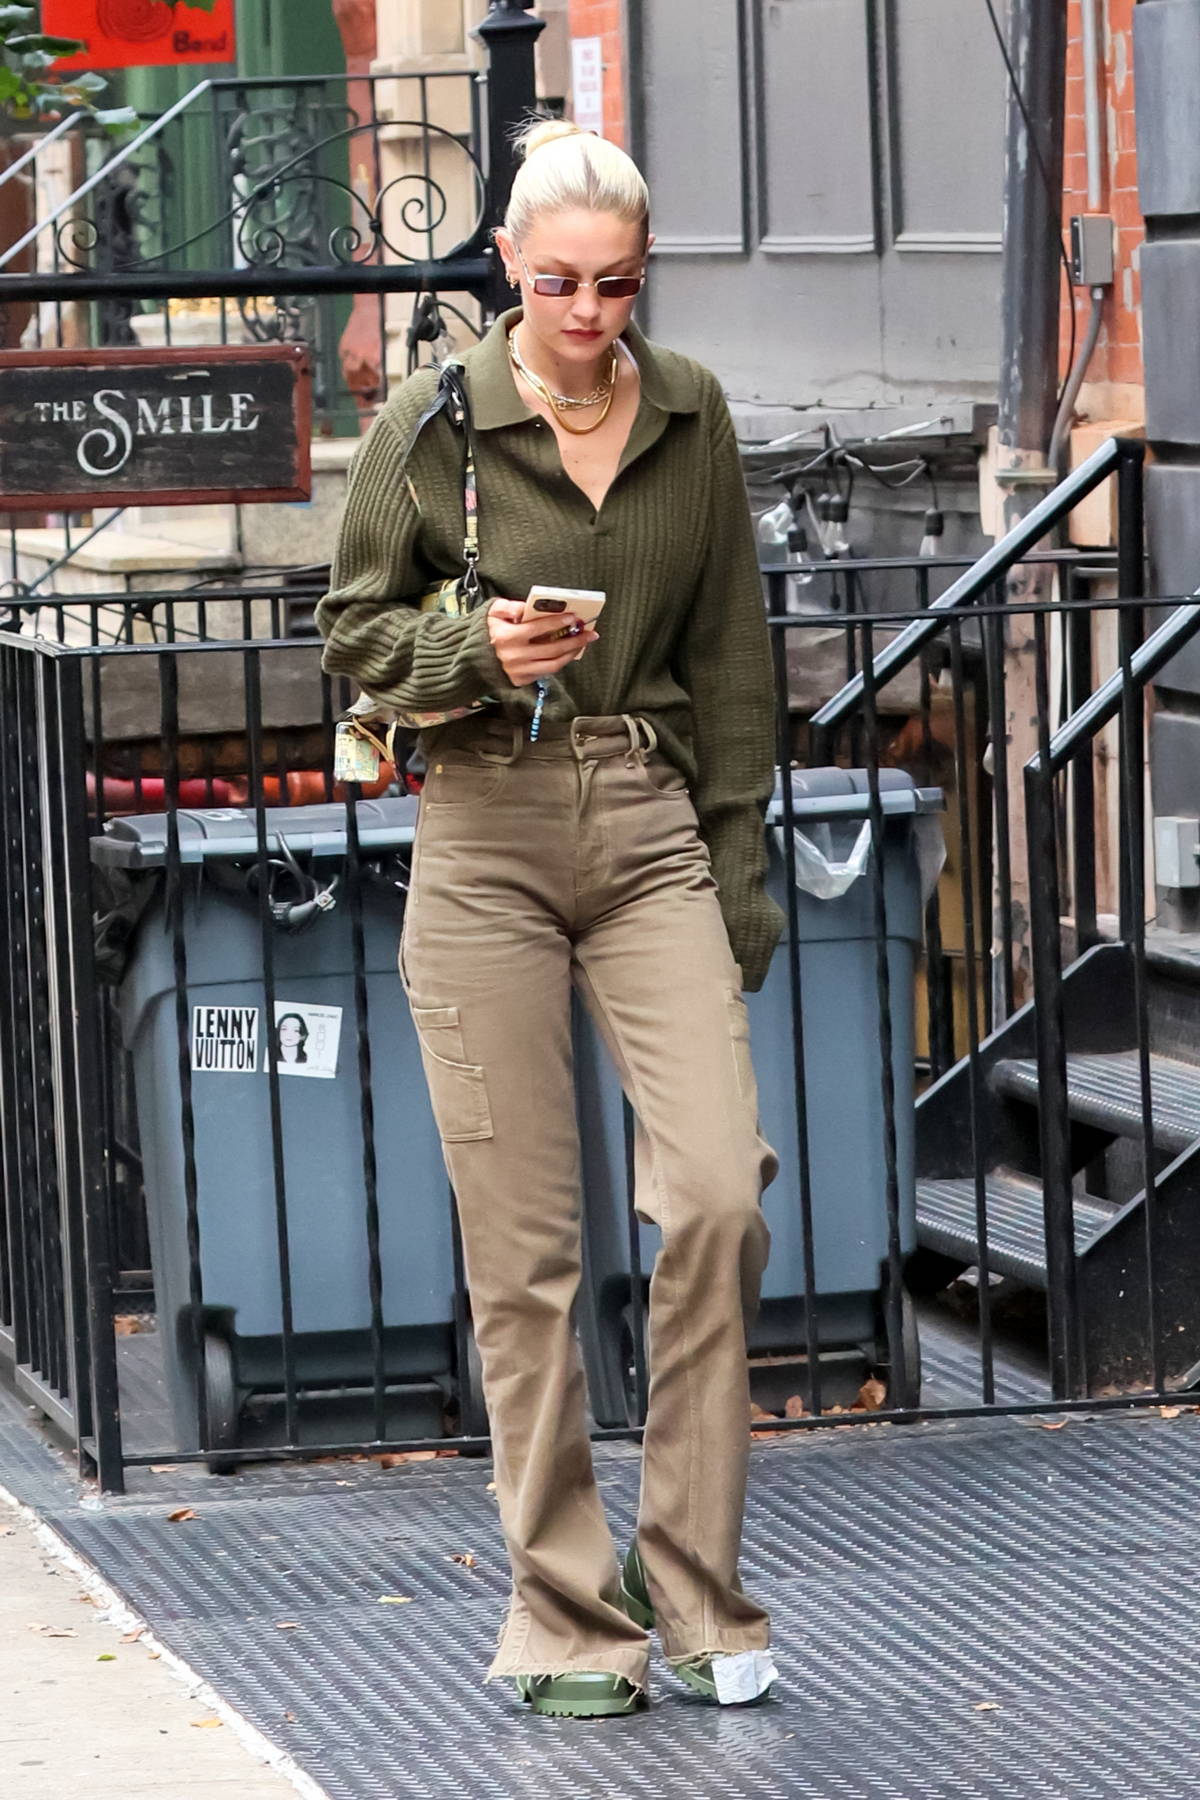 gigi hadid dons an army green sweater and cargo pants while out on a solo  stroll in new york city-070922_1